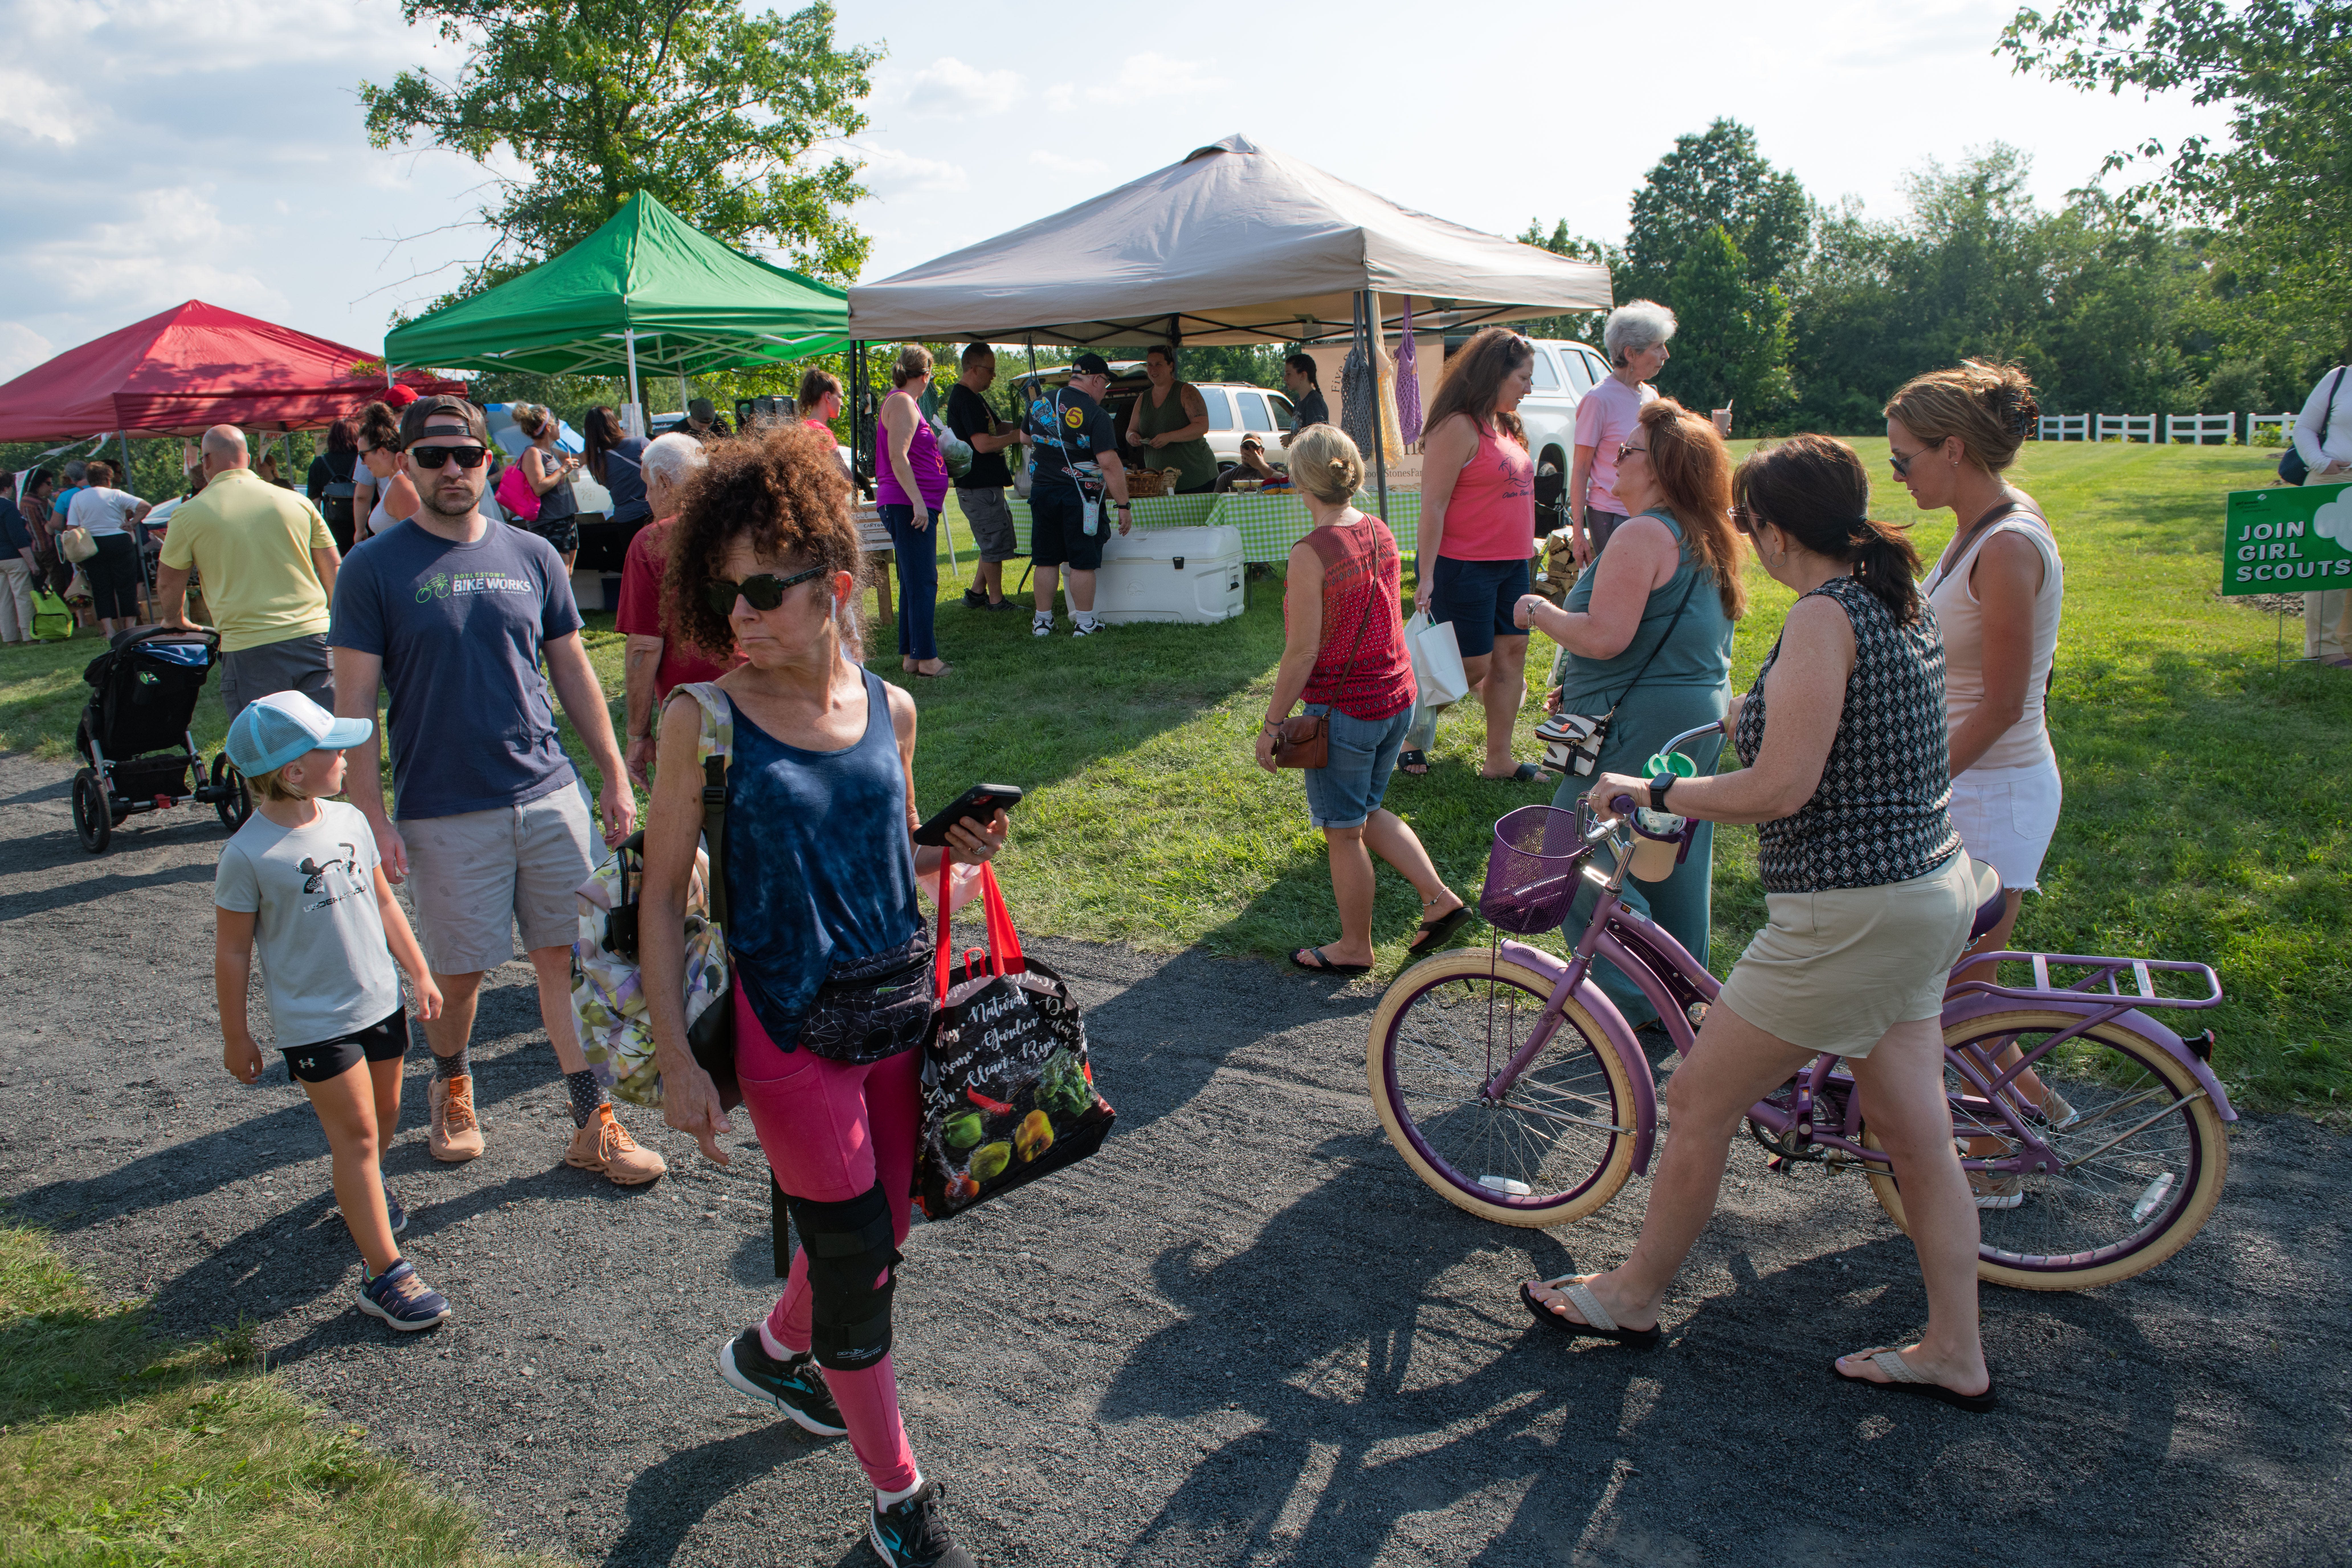 Bucks County farmers markets offer unique finds, chance to shop local. Here's schedule